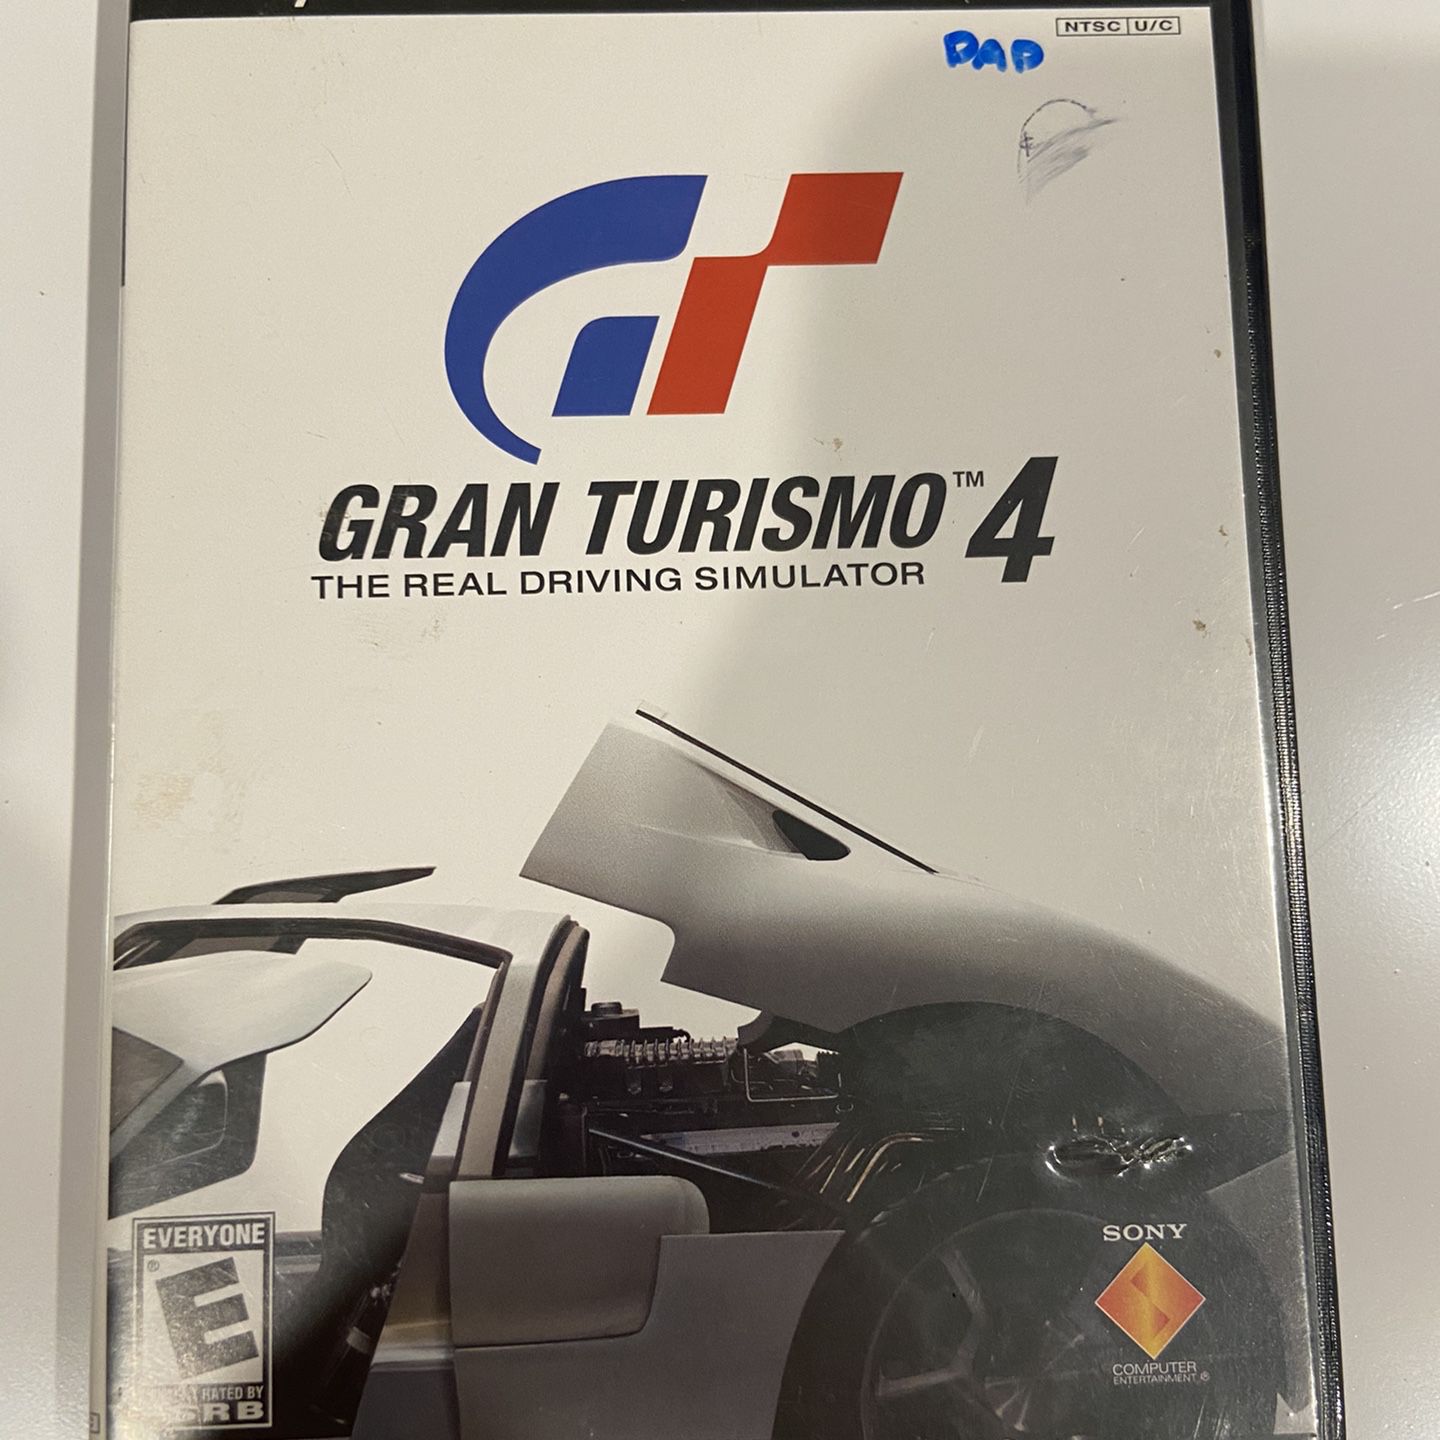 Gran Turismo 4 Prologue PS2 for Sale in Brooklyn, NY - OfferUp